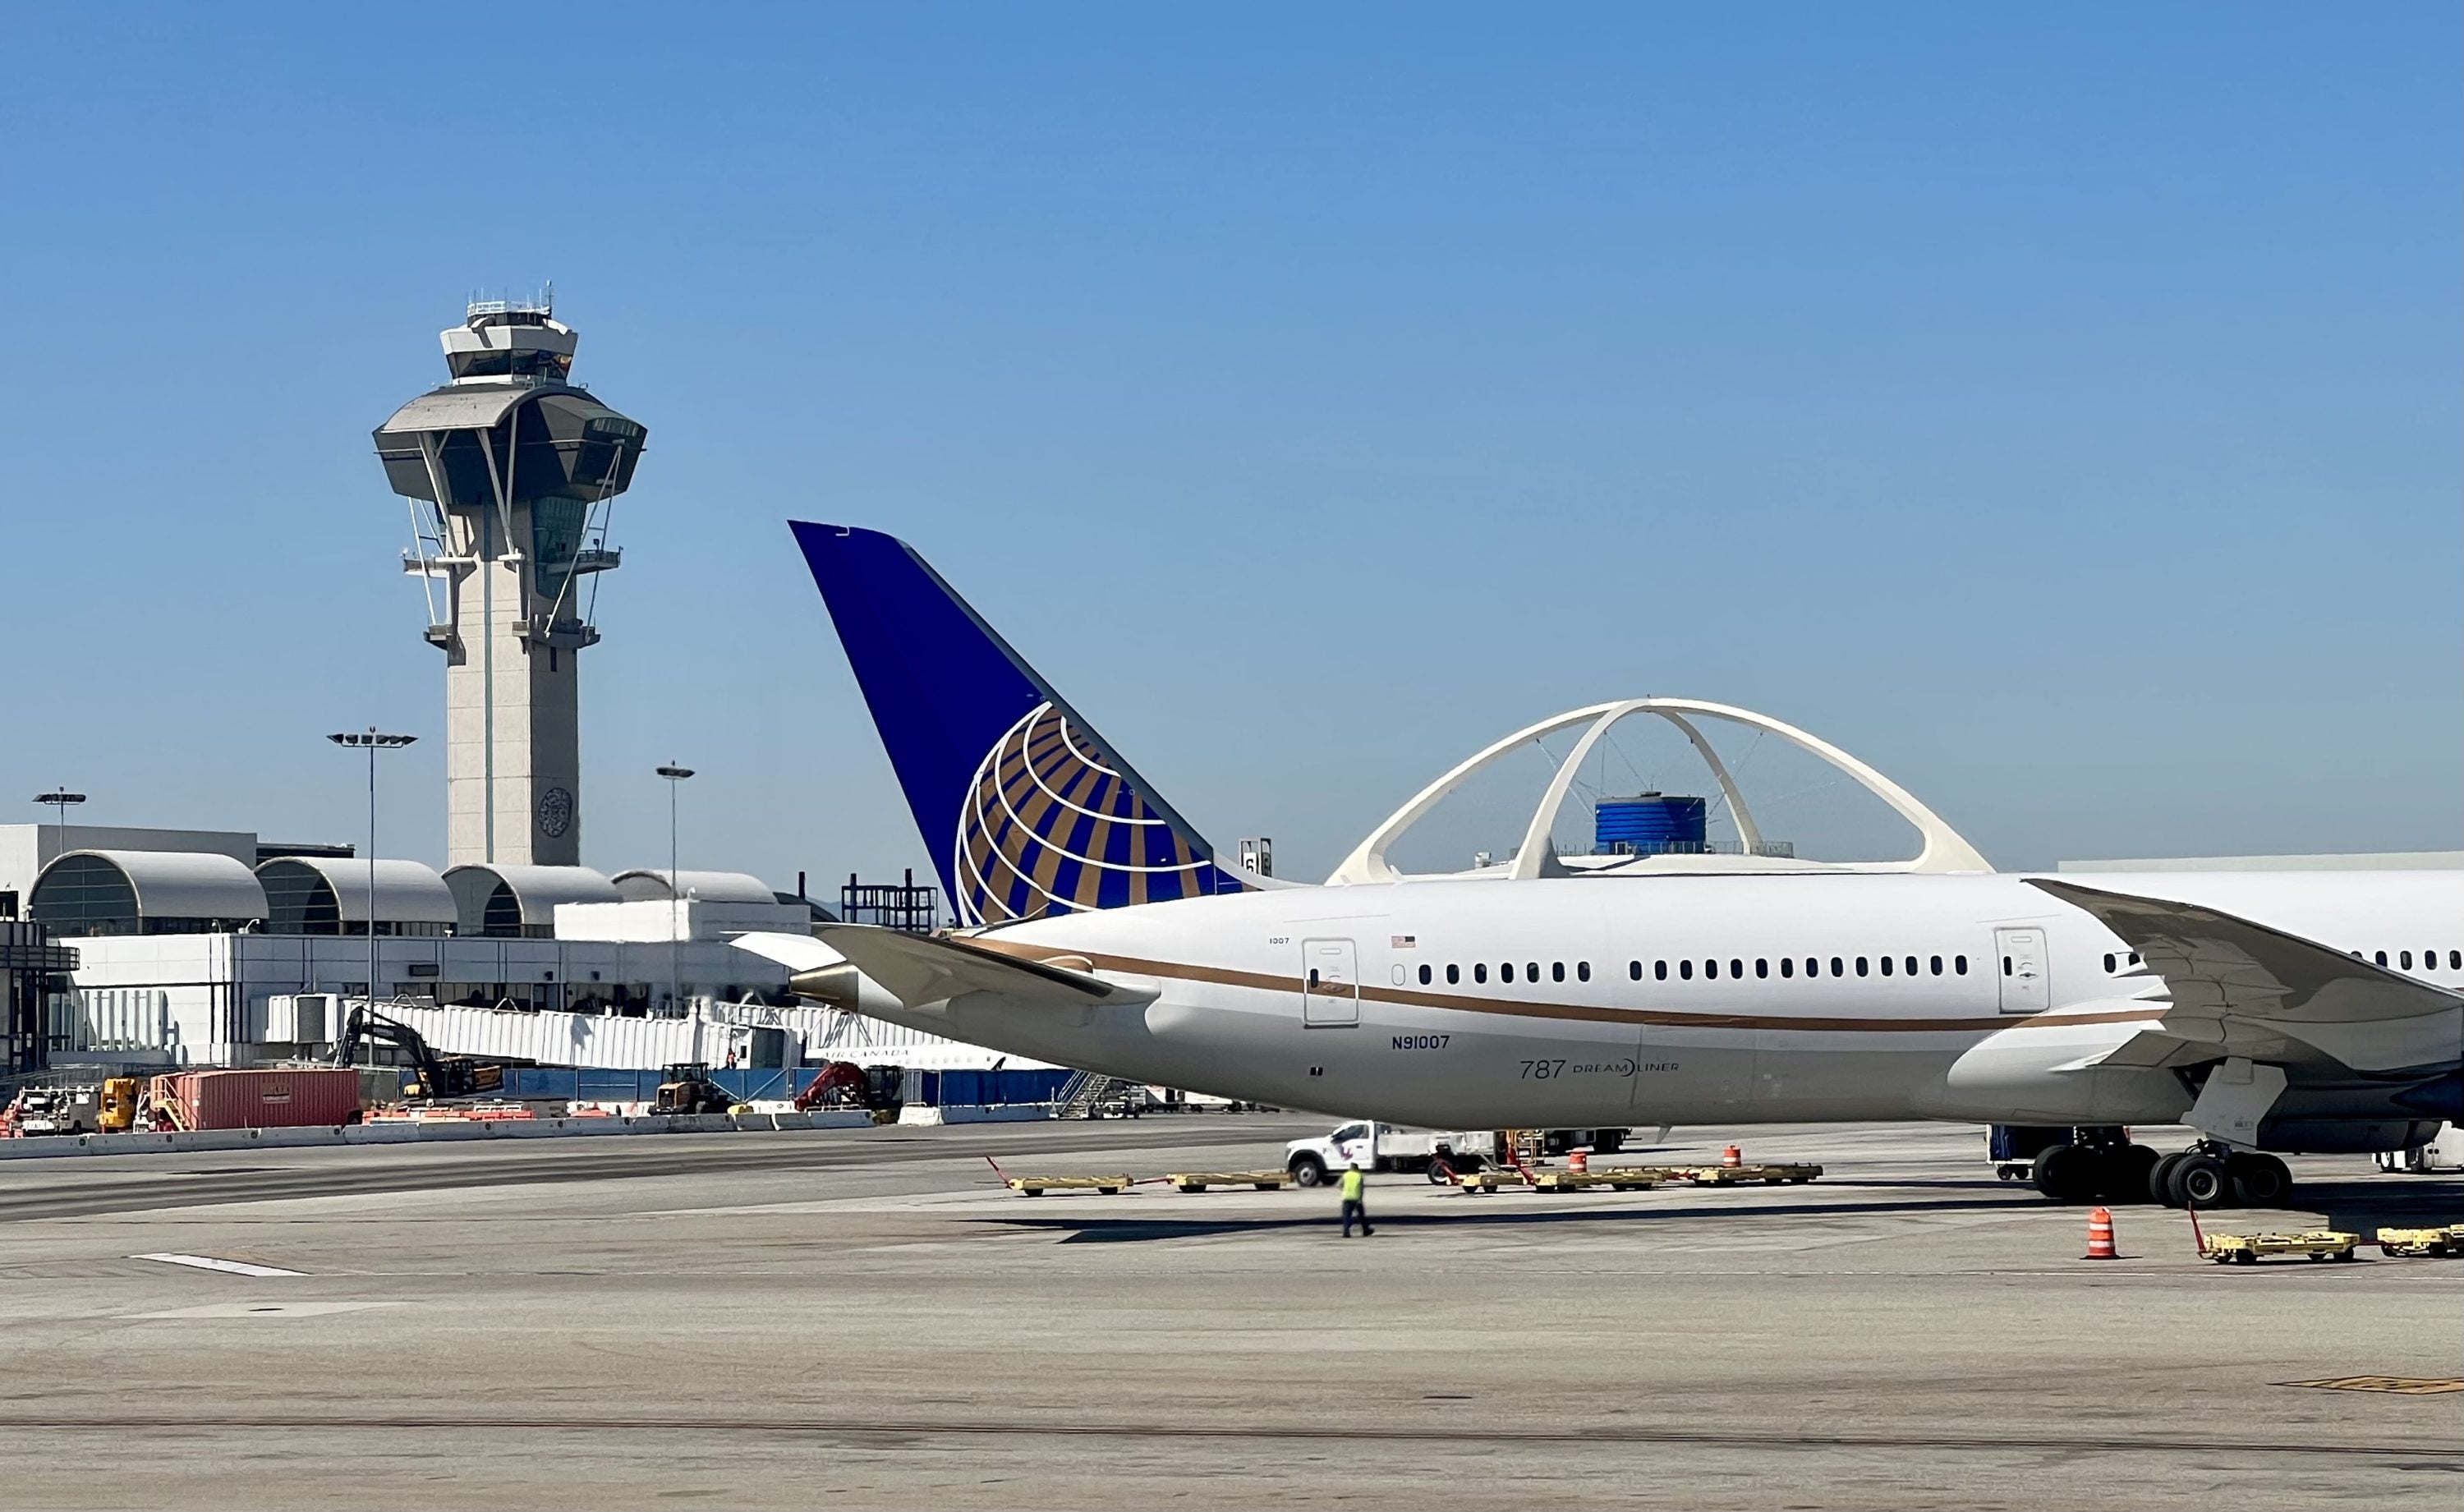 United Boeing 787 Dreamliner at LAX